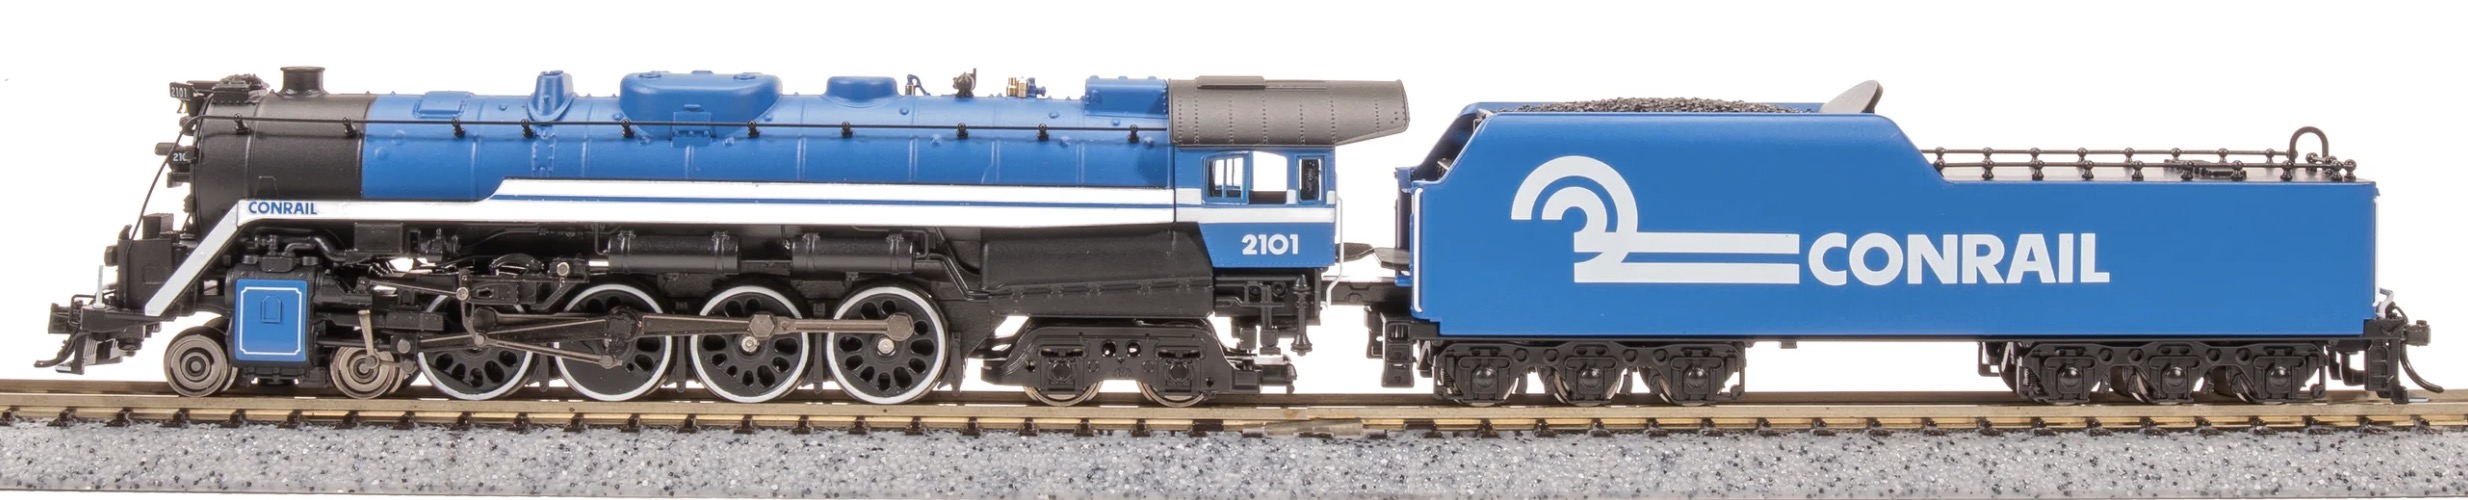 N Scale - Broadway Limited - 8250 - Locomotive, Steam, 4-8-4 T1 - Conrail - 2101